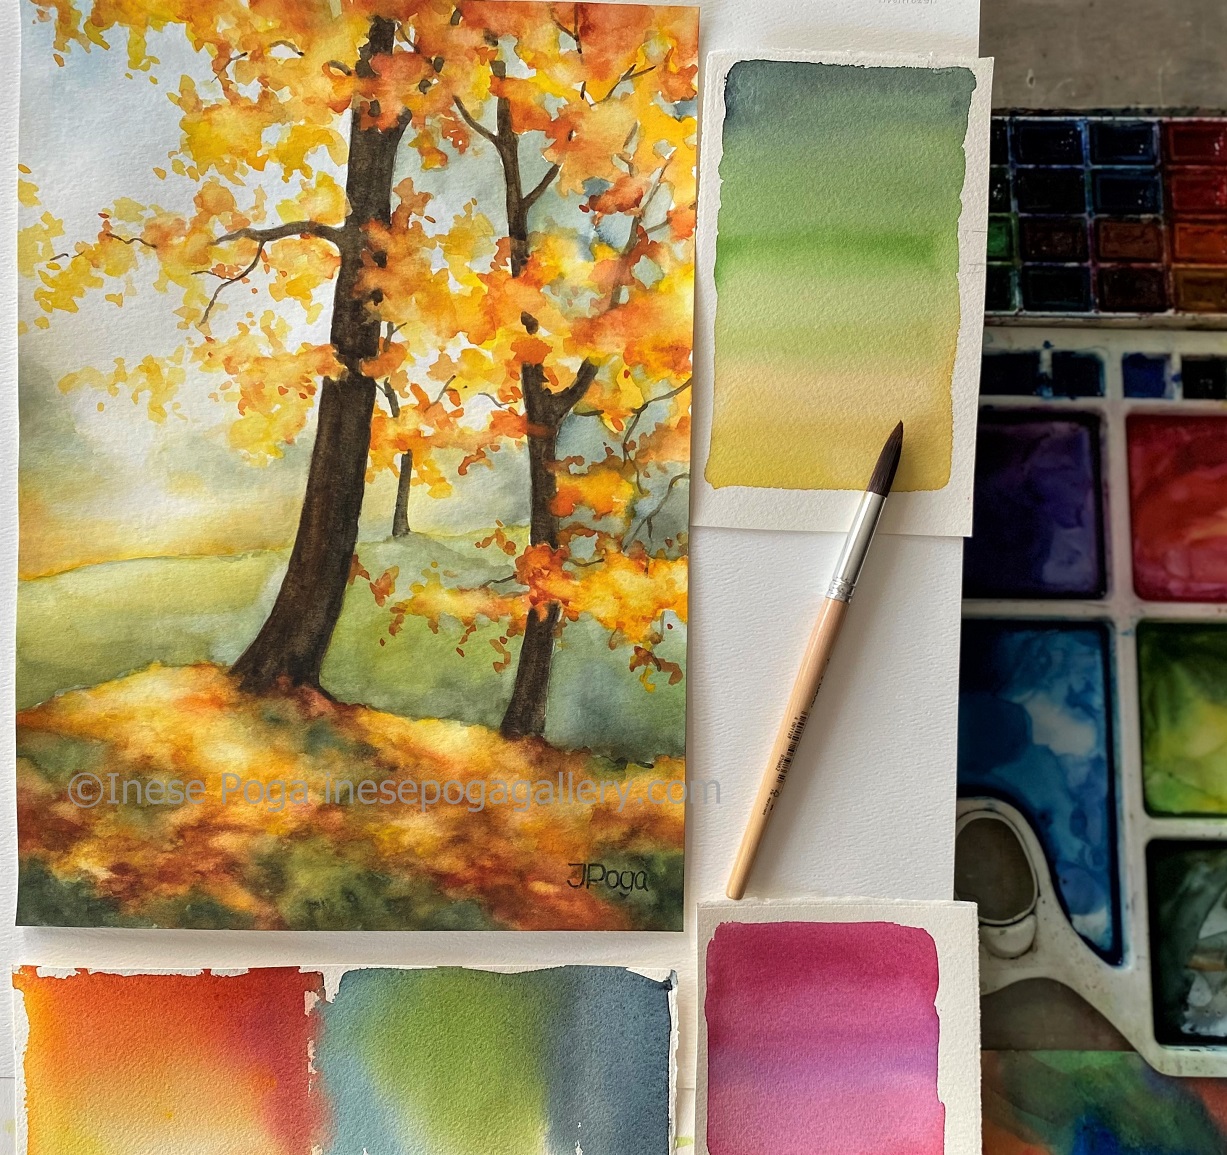 Watercolor Painting Ideas, 43 Fun Inspirations